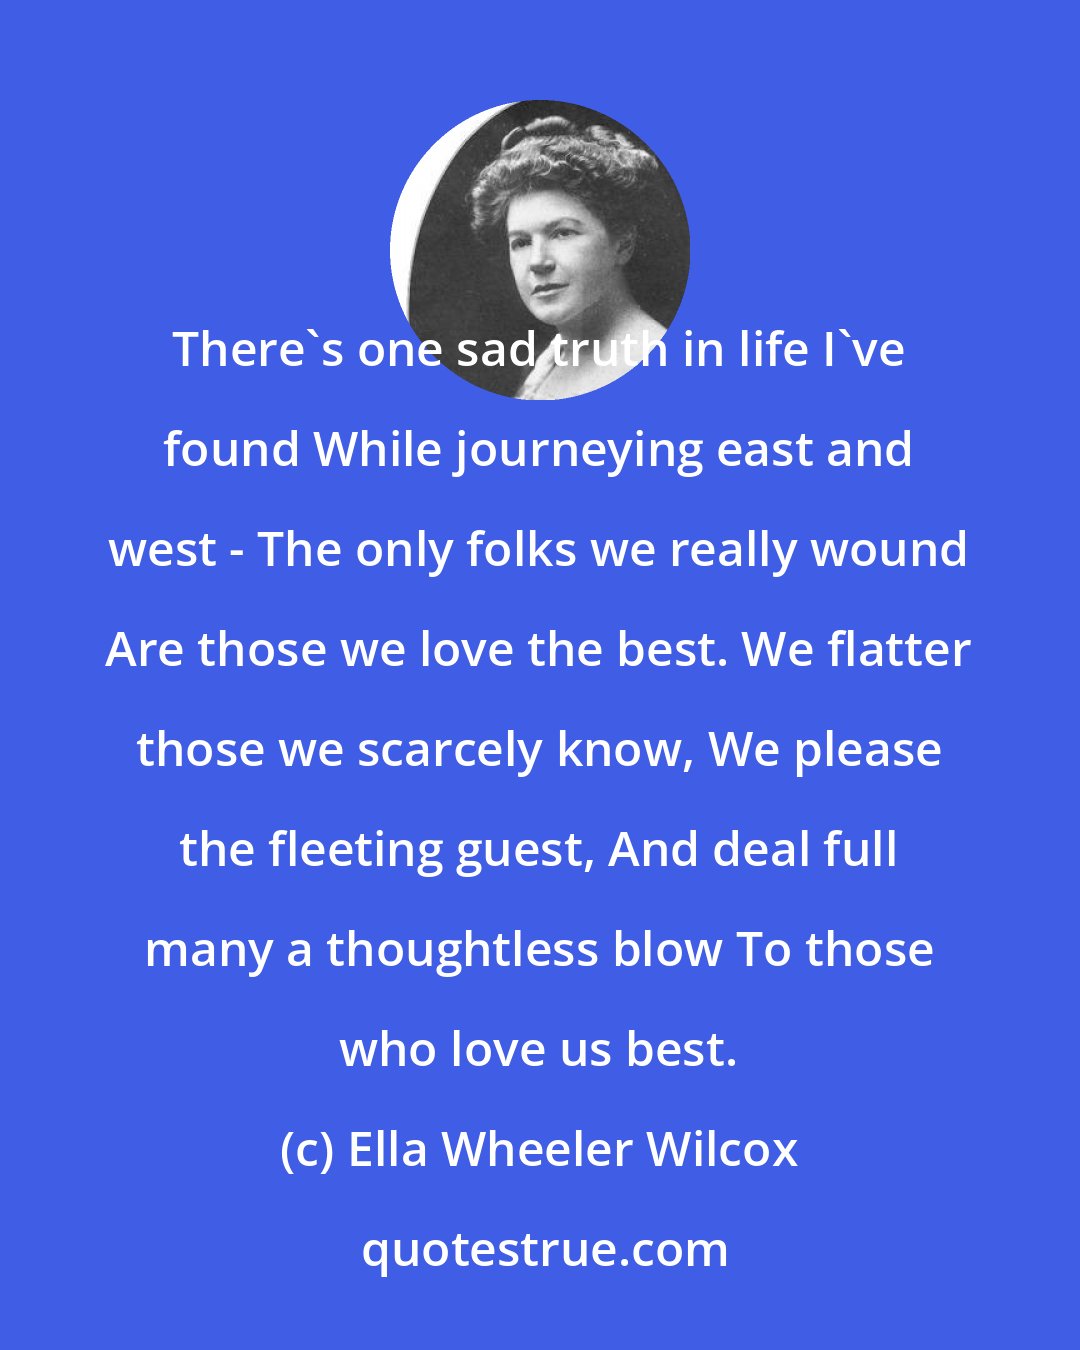 Ella Wheeler Wilcox: There's one sad truth in life I've found While journeying east and west - The only folks we really wound Are those we love the best. We flatter those we scarcely know, We please the fleeting guest, And deal full many a thoughtless blow To those who love us best.